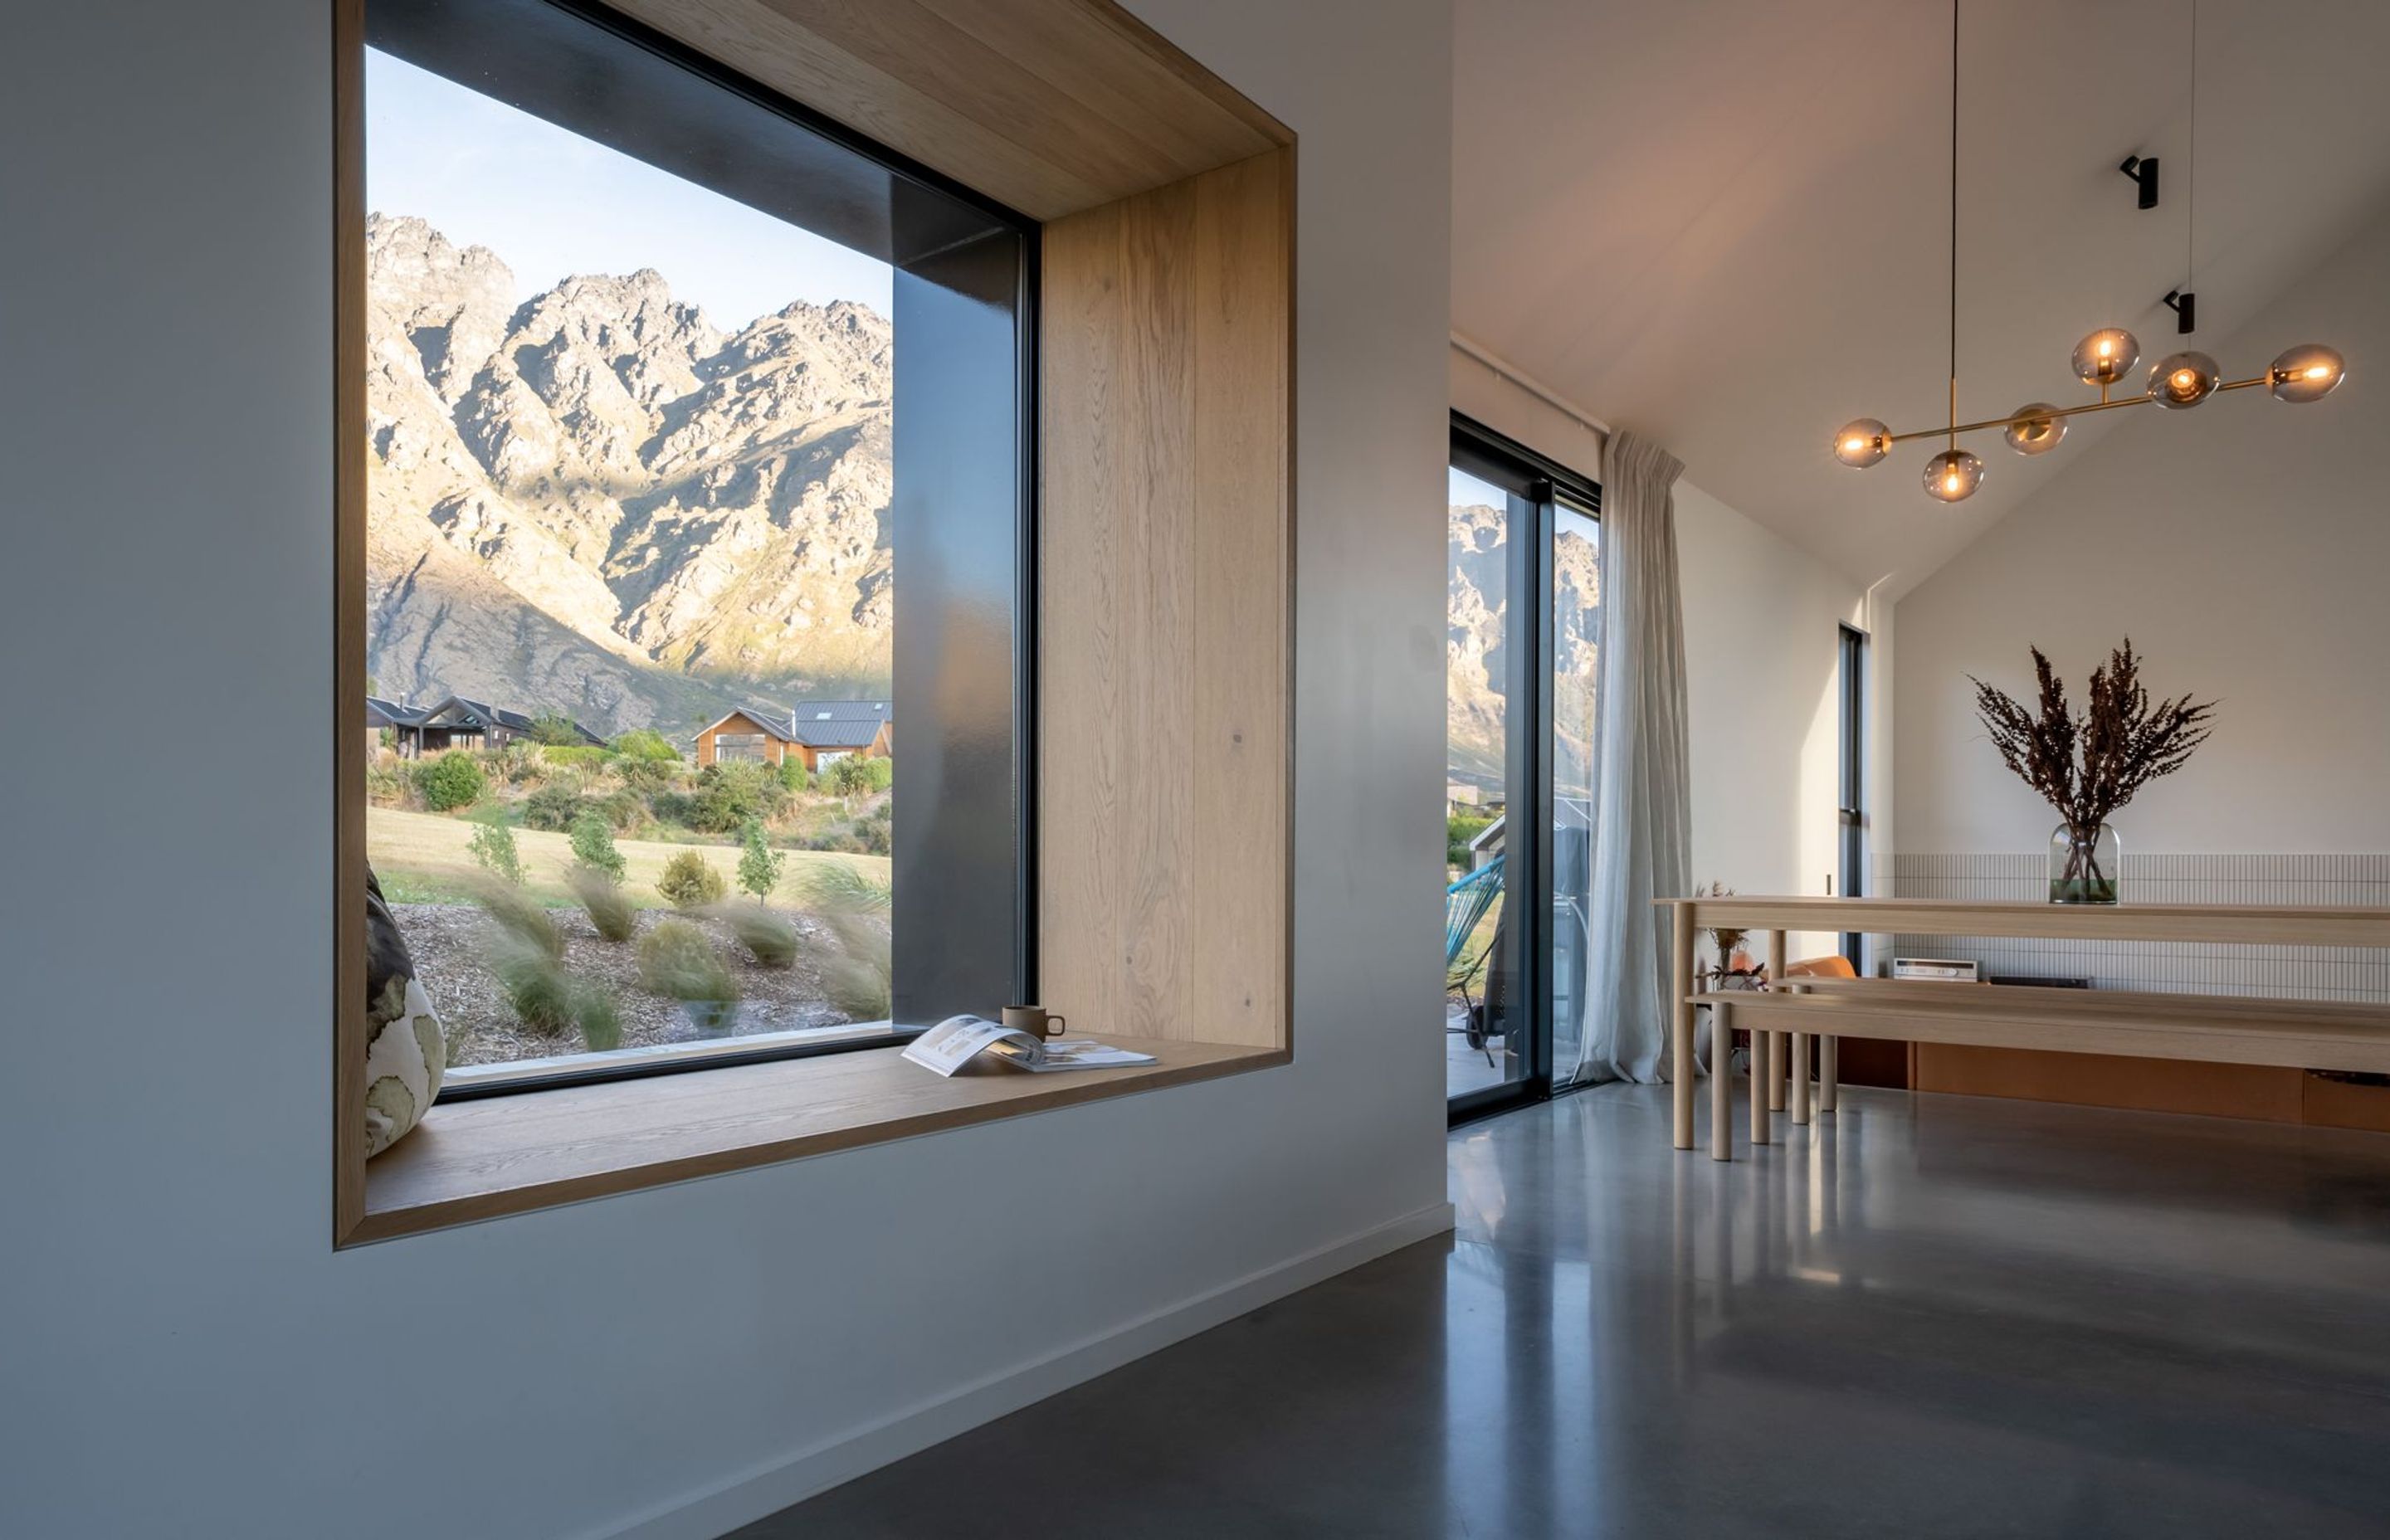 A view to The Remarkables at the rear of the home.